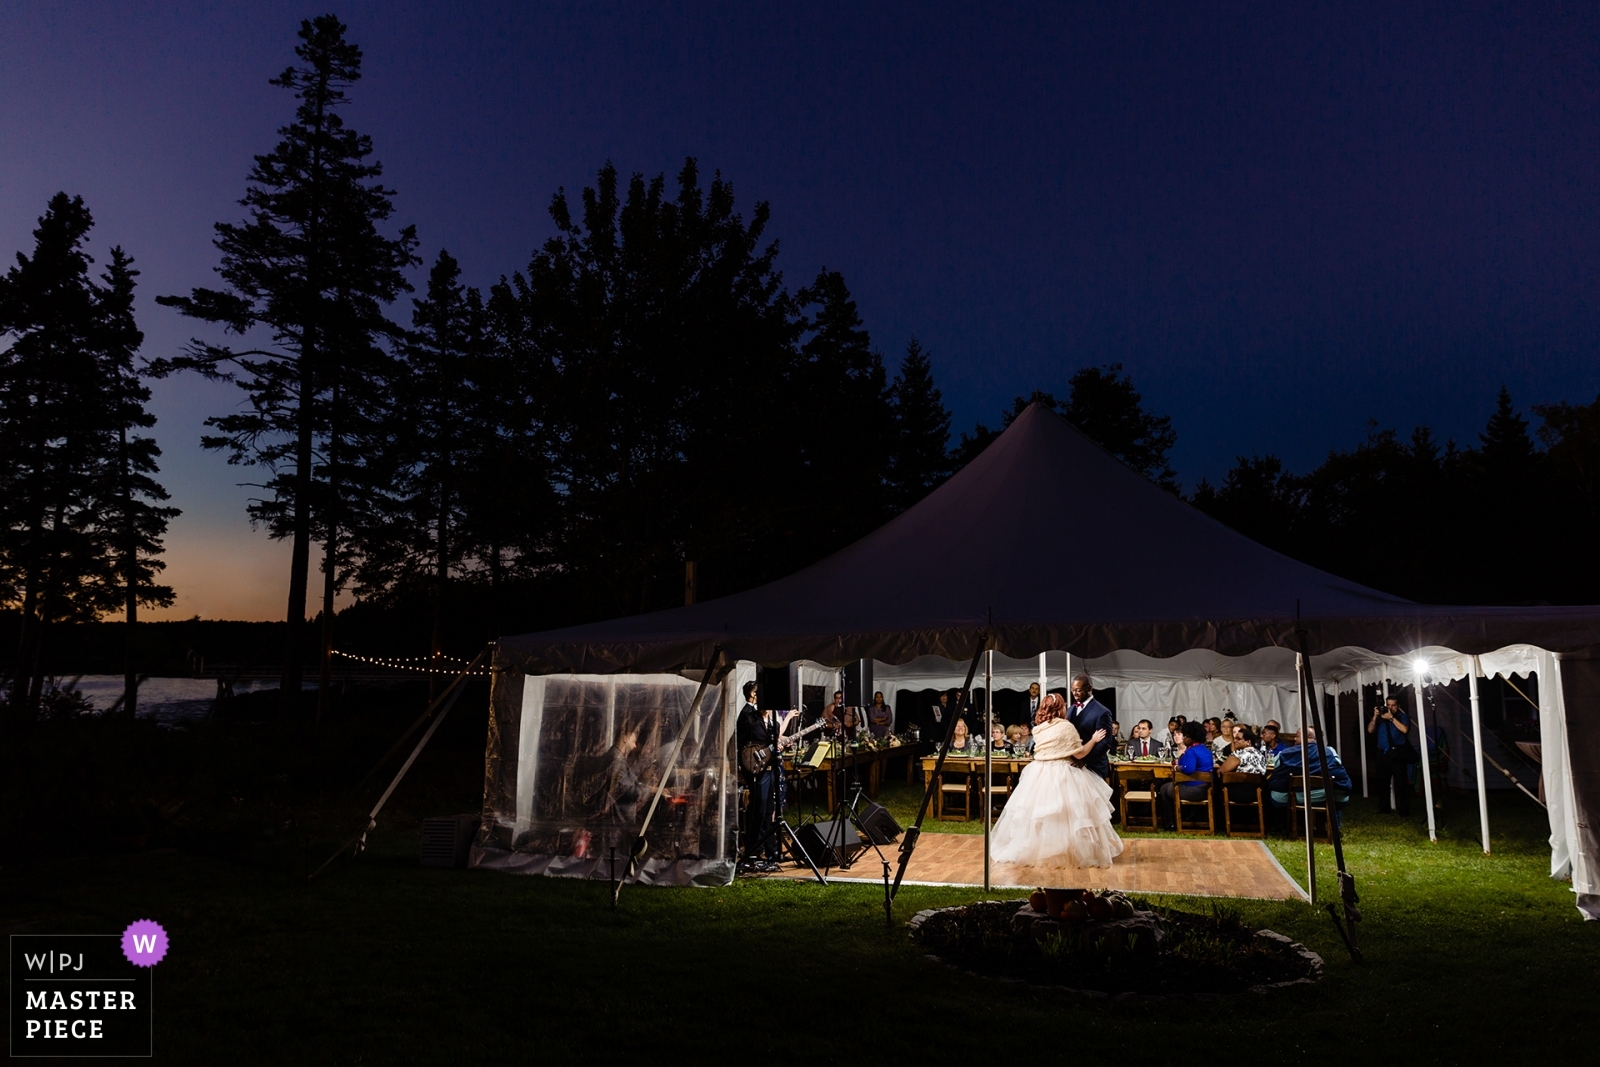 Southport Maine wedding photographer won an award for this tented oceanfront celebration where the couple danced under the sunset sky